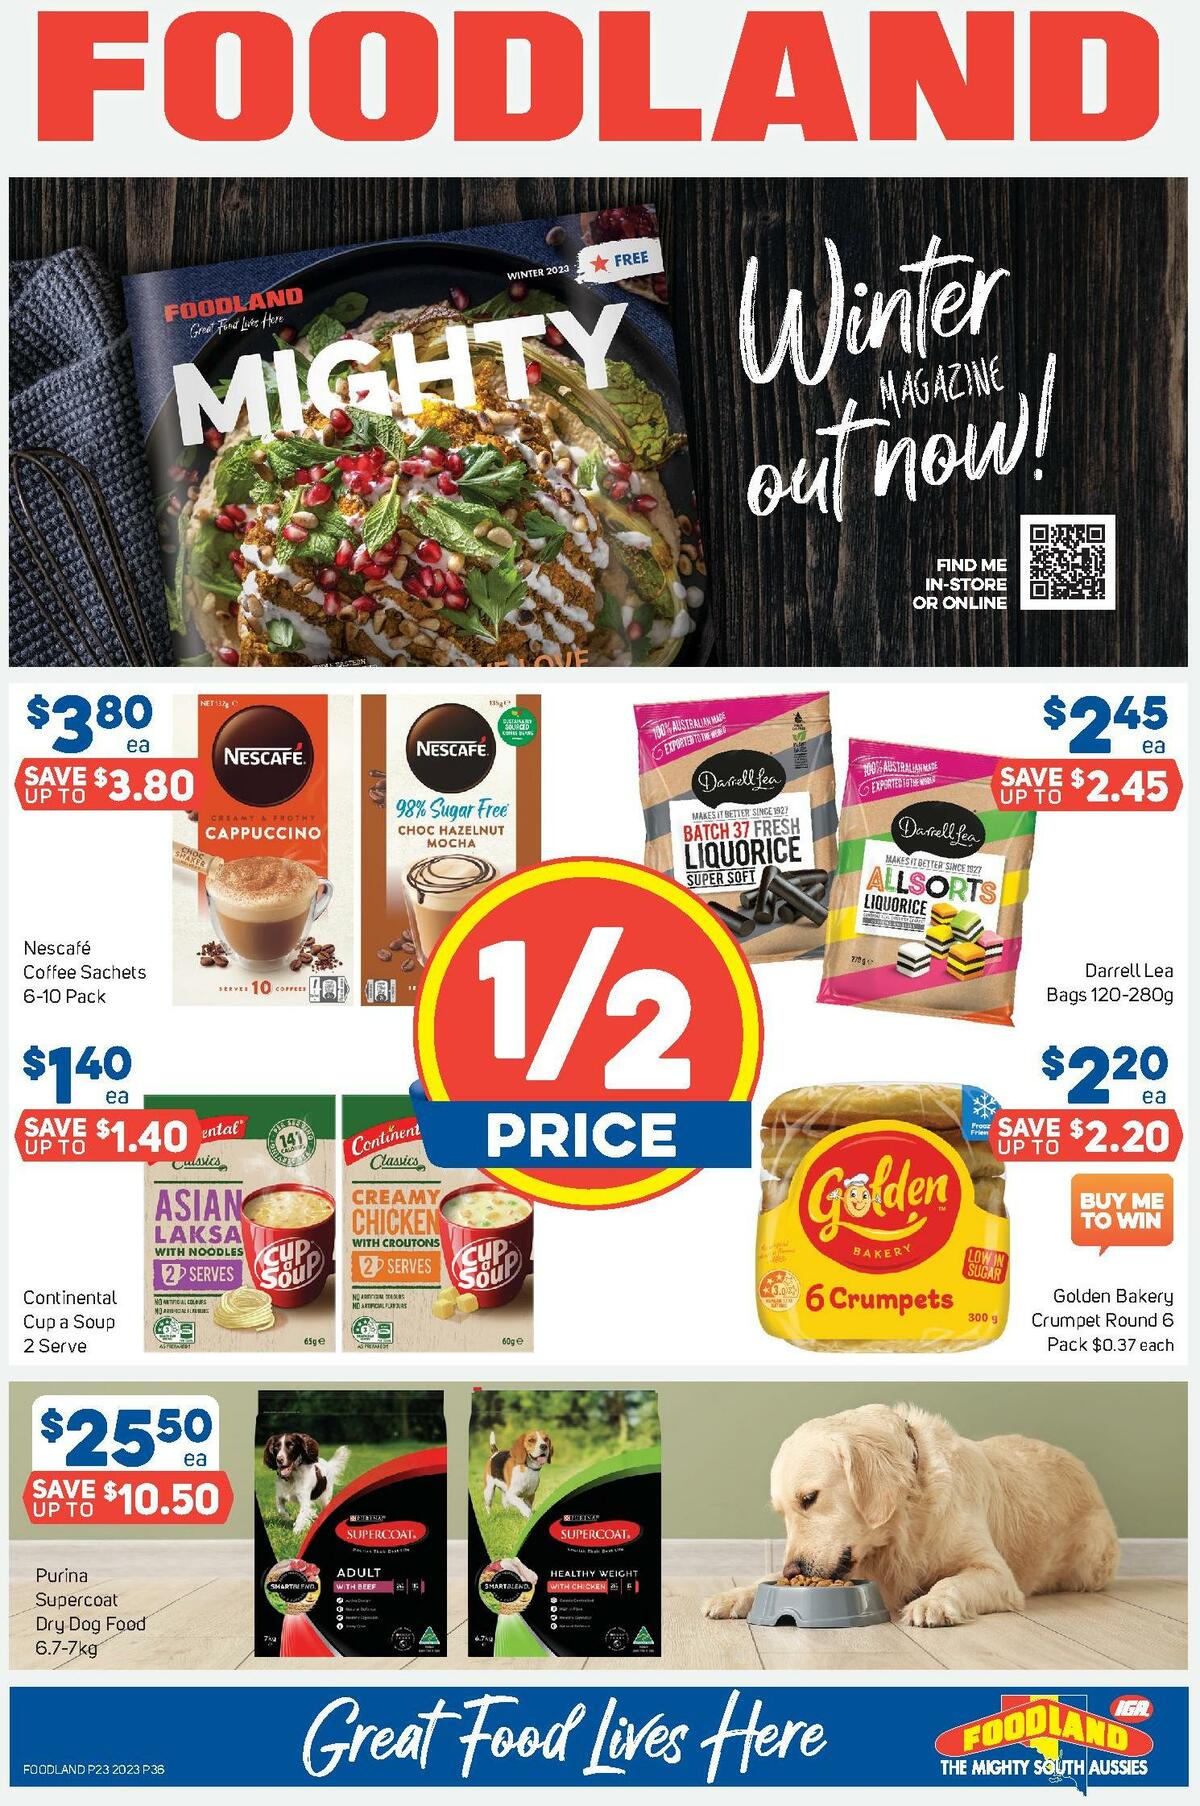 Foodland Catalogues from 7 June